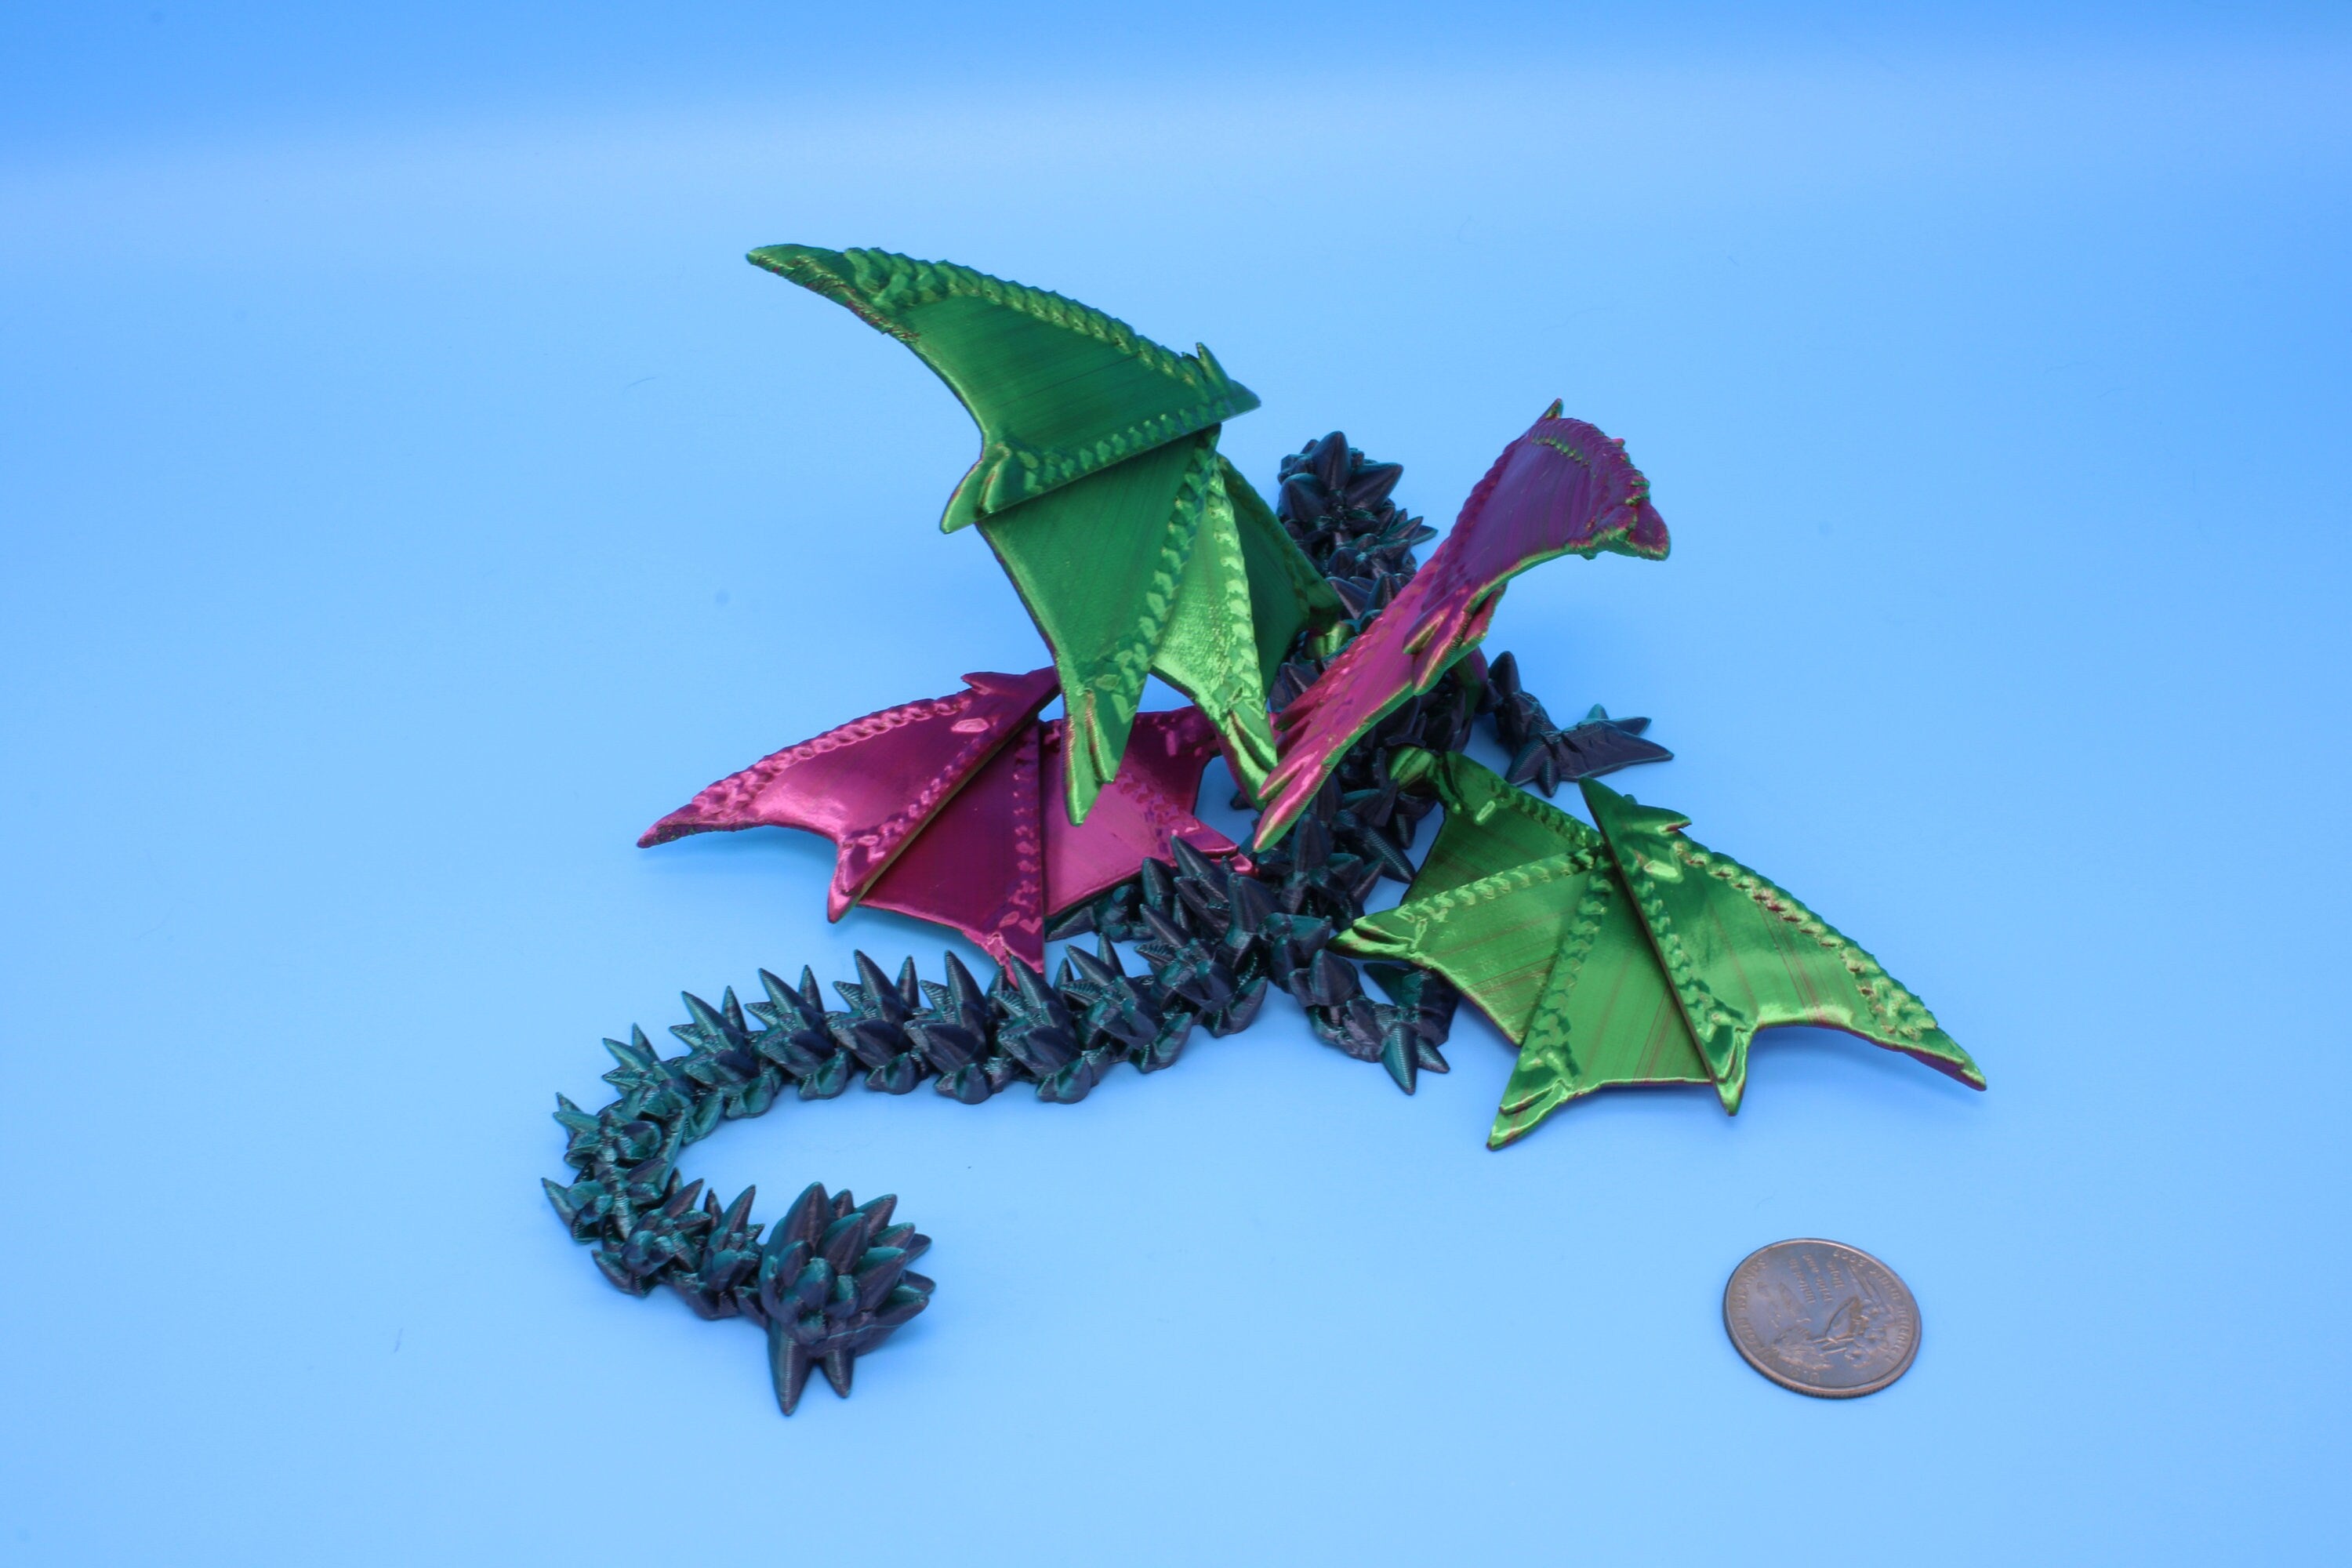 Spike Wing Dragon | 3D Printed Articulating Dragon 11.5 in.